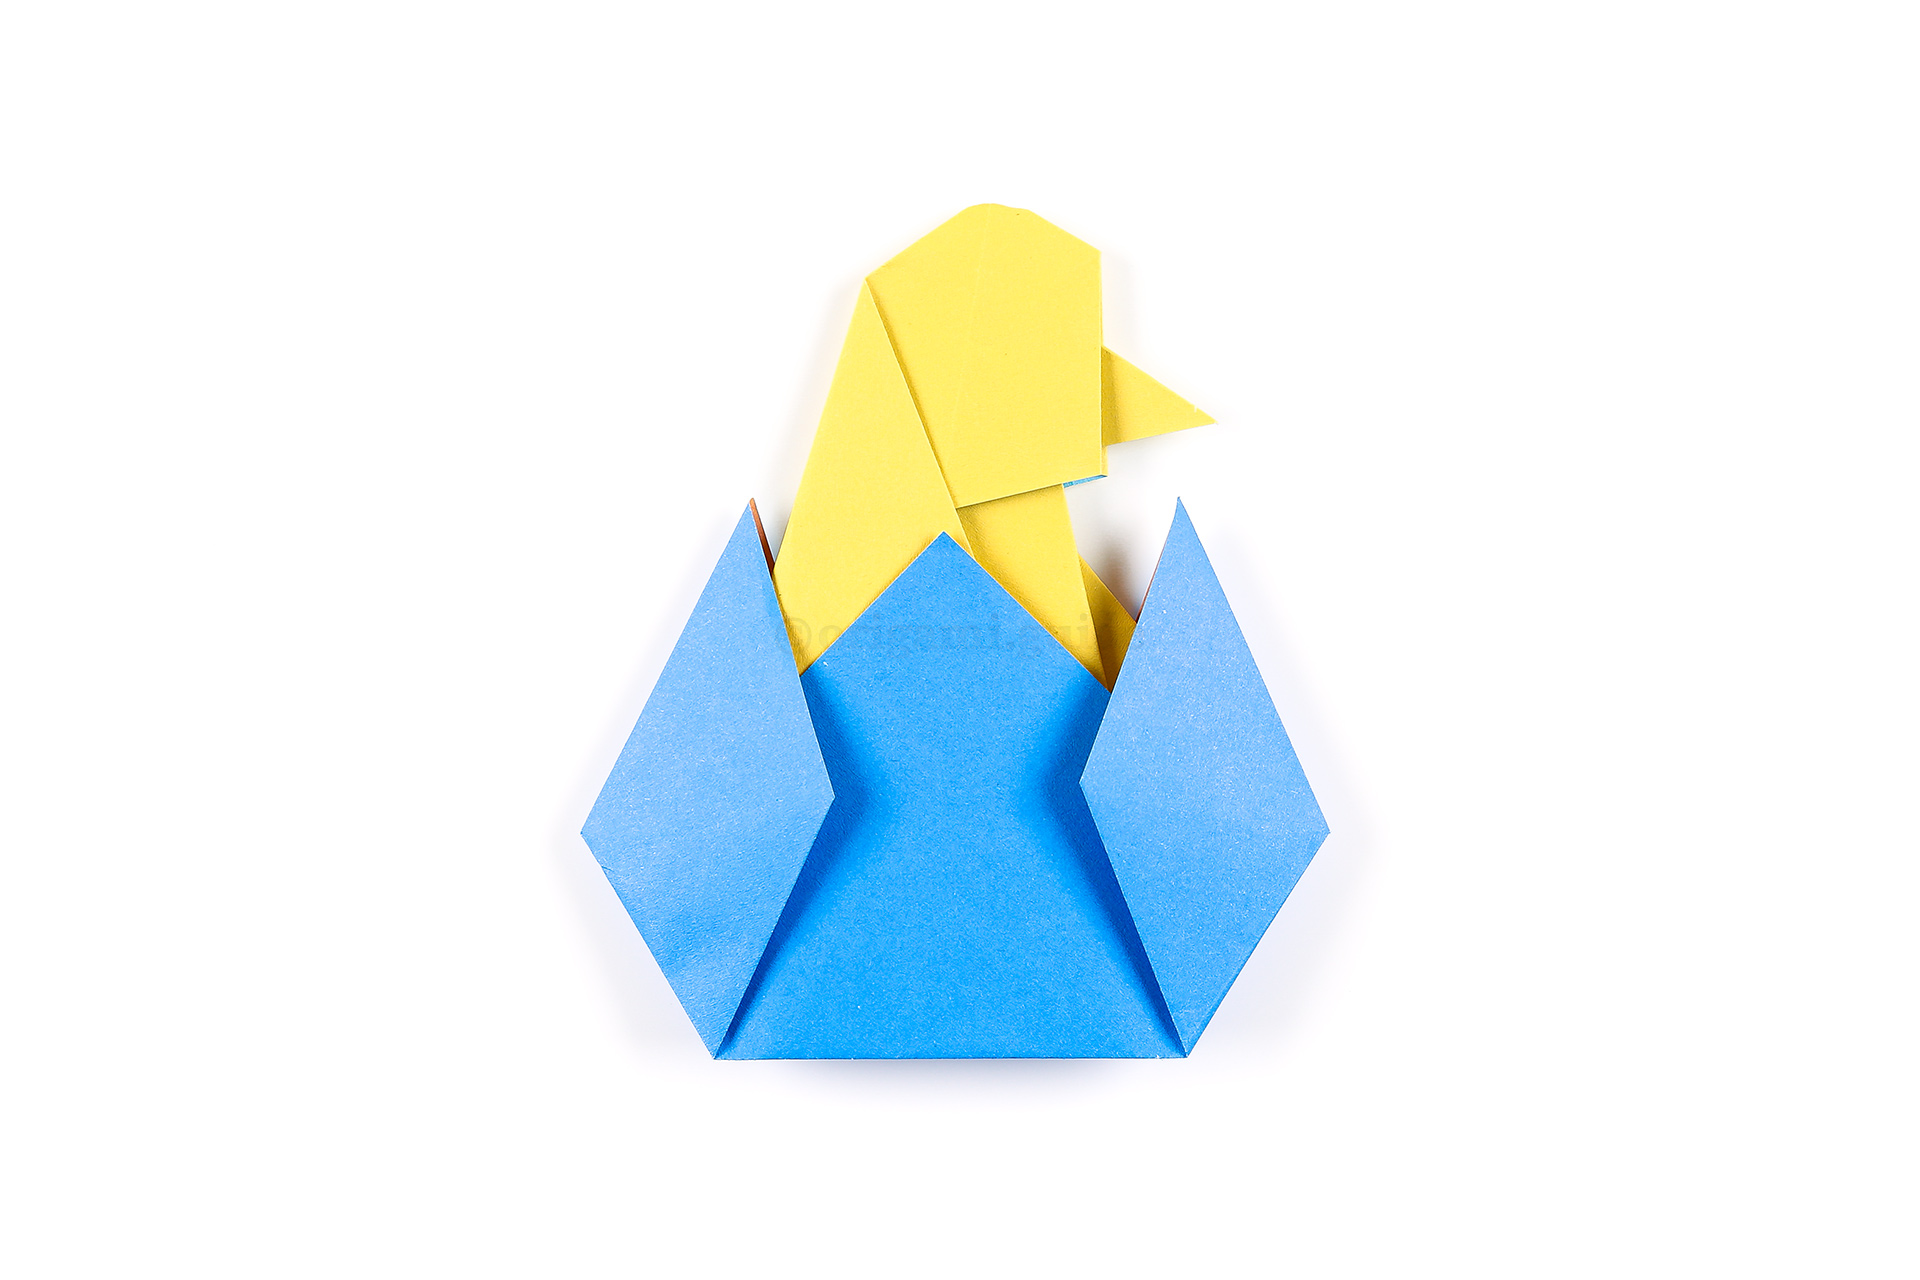 Finally, you can put the origami chick inside the egg!